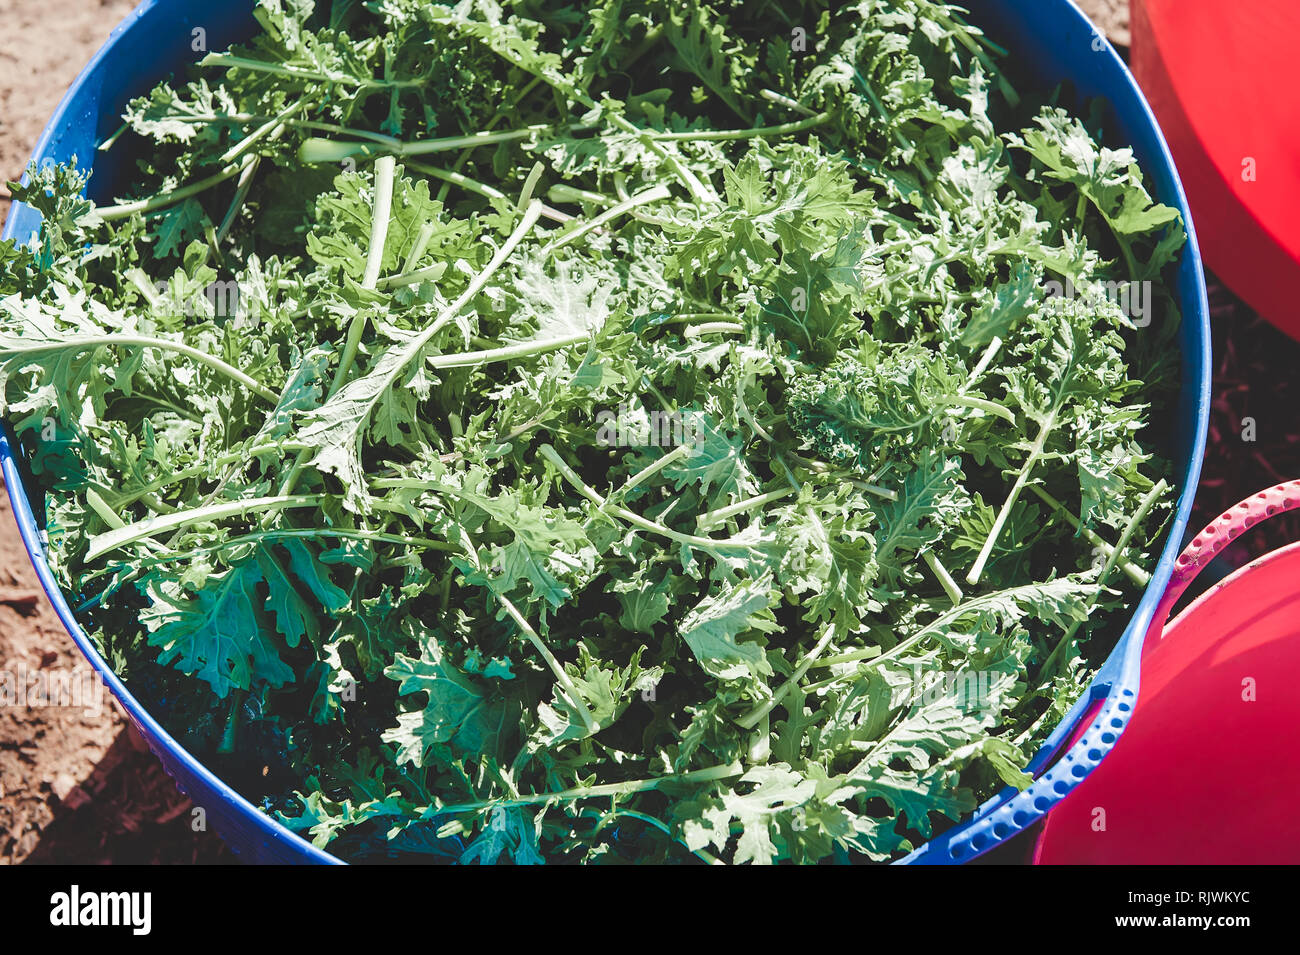 A large blue bucket filled with freshly harvested kale. Stock Photo